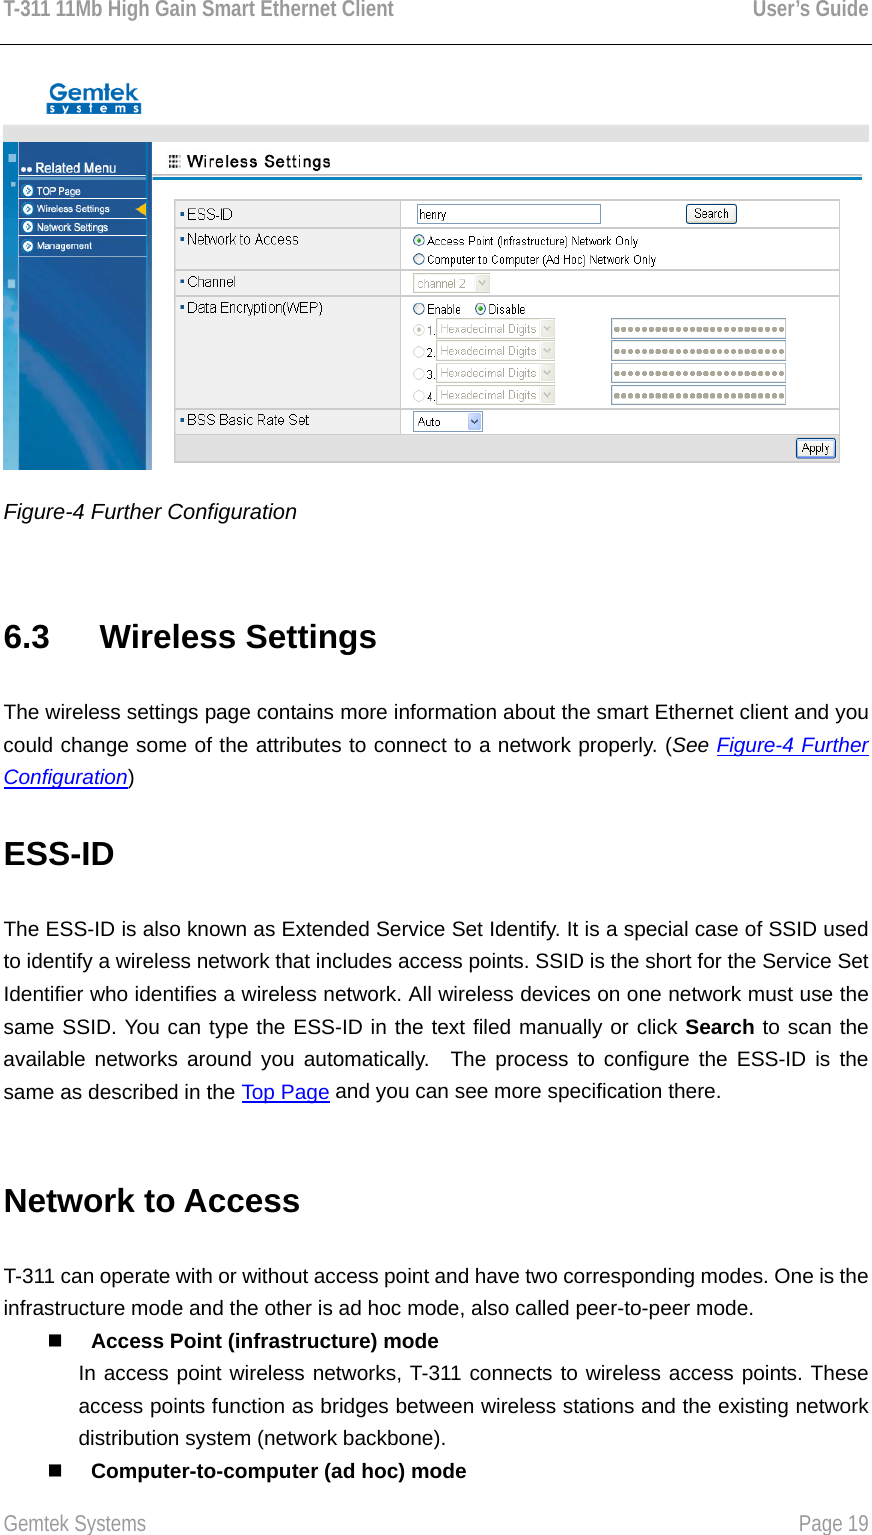 T-311 11Mb High Gain Smart Ethernet Client    User’s Guide  Gemtek Systems    Page 19   Figure-4 Further Configuration  6.3   Wireless Settings The wireless settings page contains more information about the smart Ethernet client and you could change some of the attributes to connect to a network properly. (See Figure-4 Further Configuration) ESS-ID  The ESS-ID is also known as Extended Service Set Identify. It is a special case of SSID used to identify a wireless network that includes access points. SSID is the short for the Service Set Identifier who identifies a wireless network. All wireless devices on one network must use the same SSID. You can type the ESS-ID in the text filed manually or click Search to scan the available networks around you automatically.  The process to configure the ESS-ID is the same as described in the Top Page and you can see more specification there.  Network to Access   T-311 can operate with or without access point and have two corresponding modes. One is the infrastructure mode and the other is ad hoc mode, also called peer-to-peer mode.     Access Point (infrastructure) mode In access point wireless networks, T-311 connects to wireless access points. These access points function as bridges between wireless stations and the existing network distribution system (network backbone).     Computer-to-computer (ad hoc) mode 